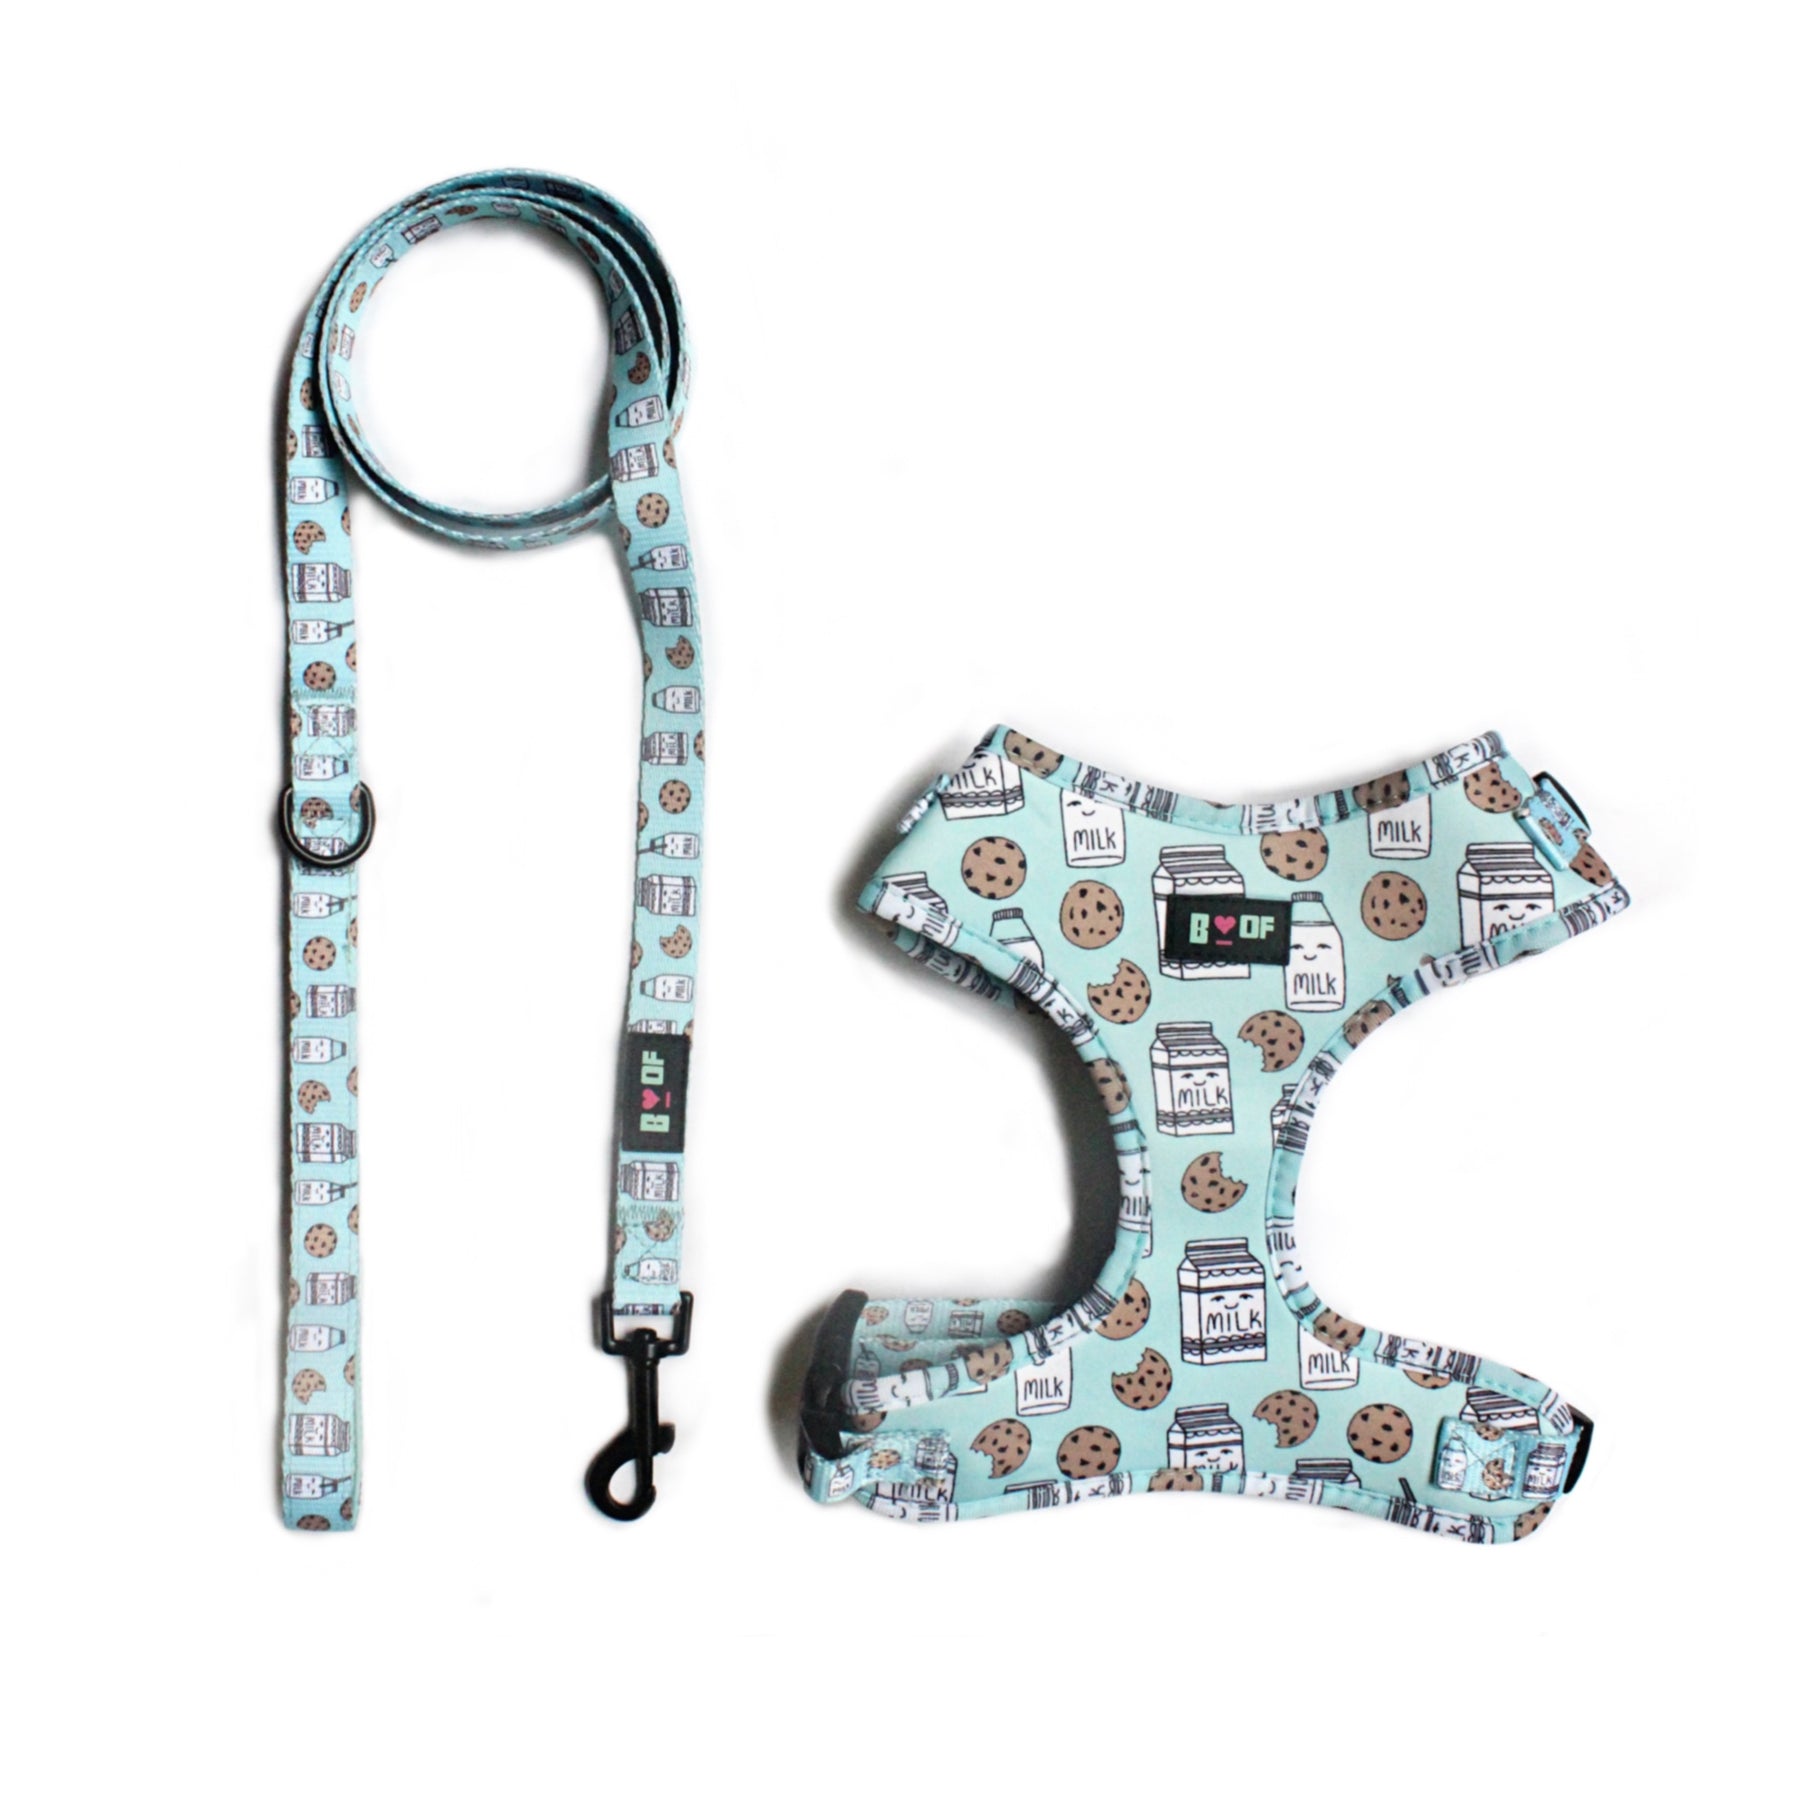 COOKIE HARNESS AND LEASH